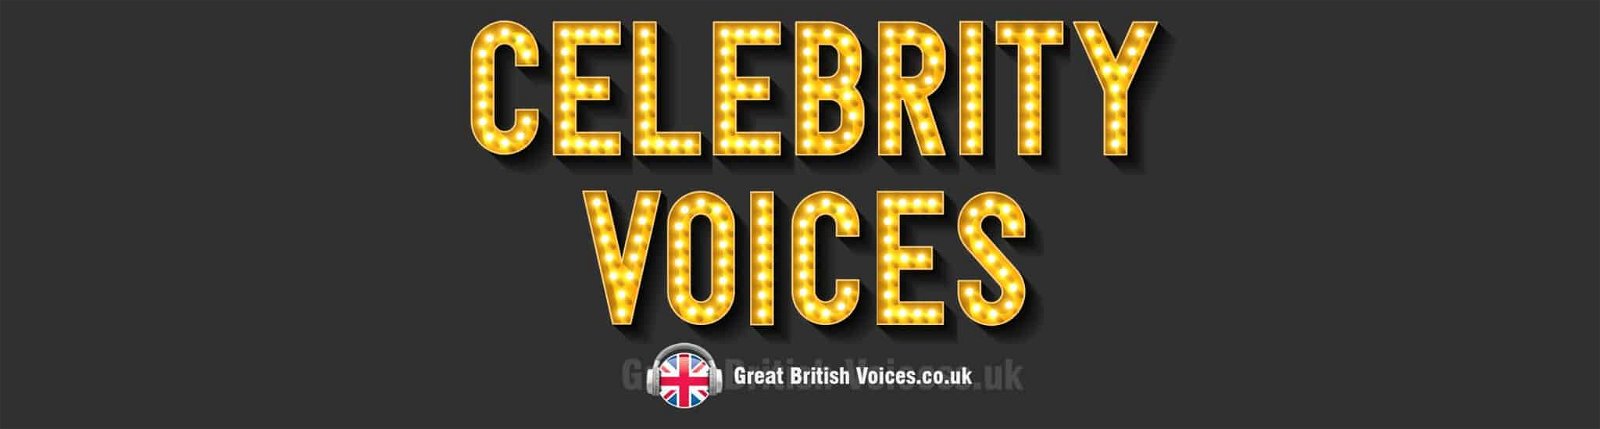 Book a famous celebrity voice over at Great British Voices